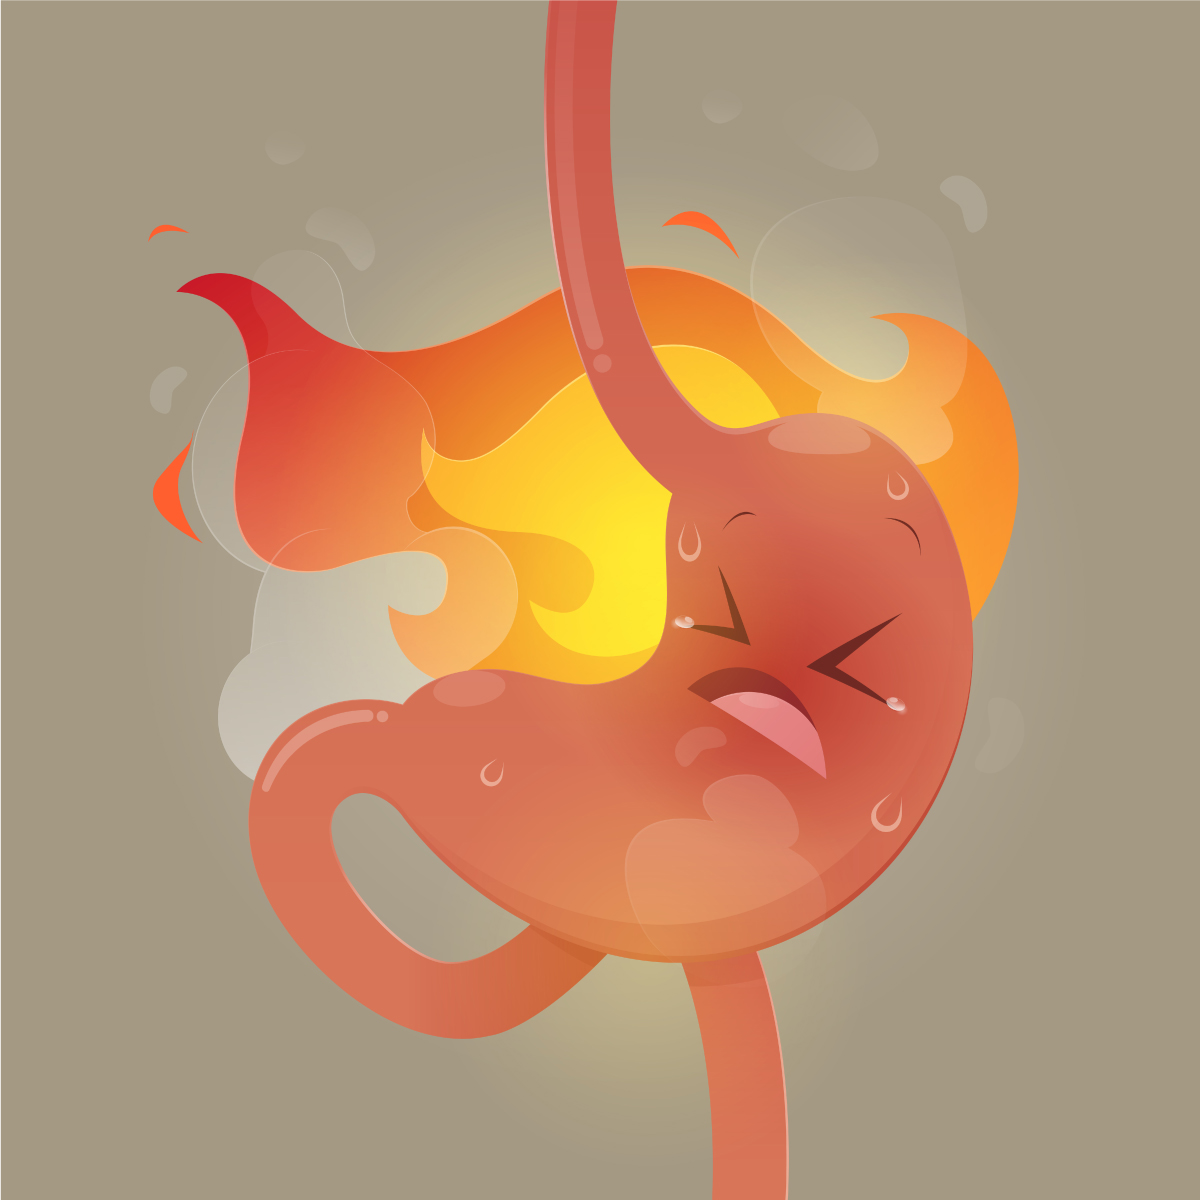 Causes And Treatment Of Acid Reflux